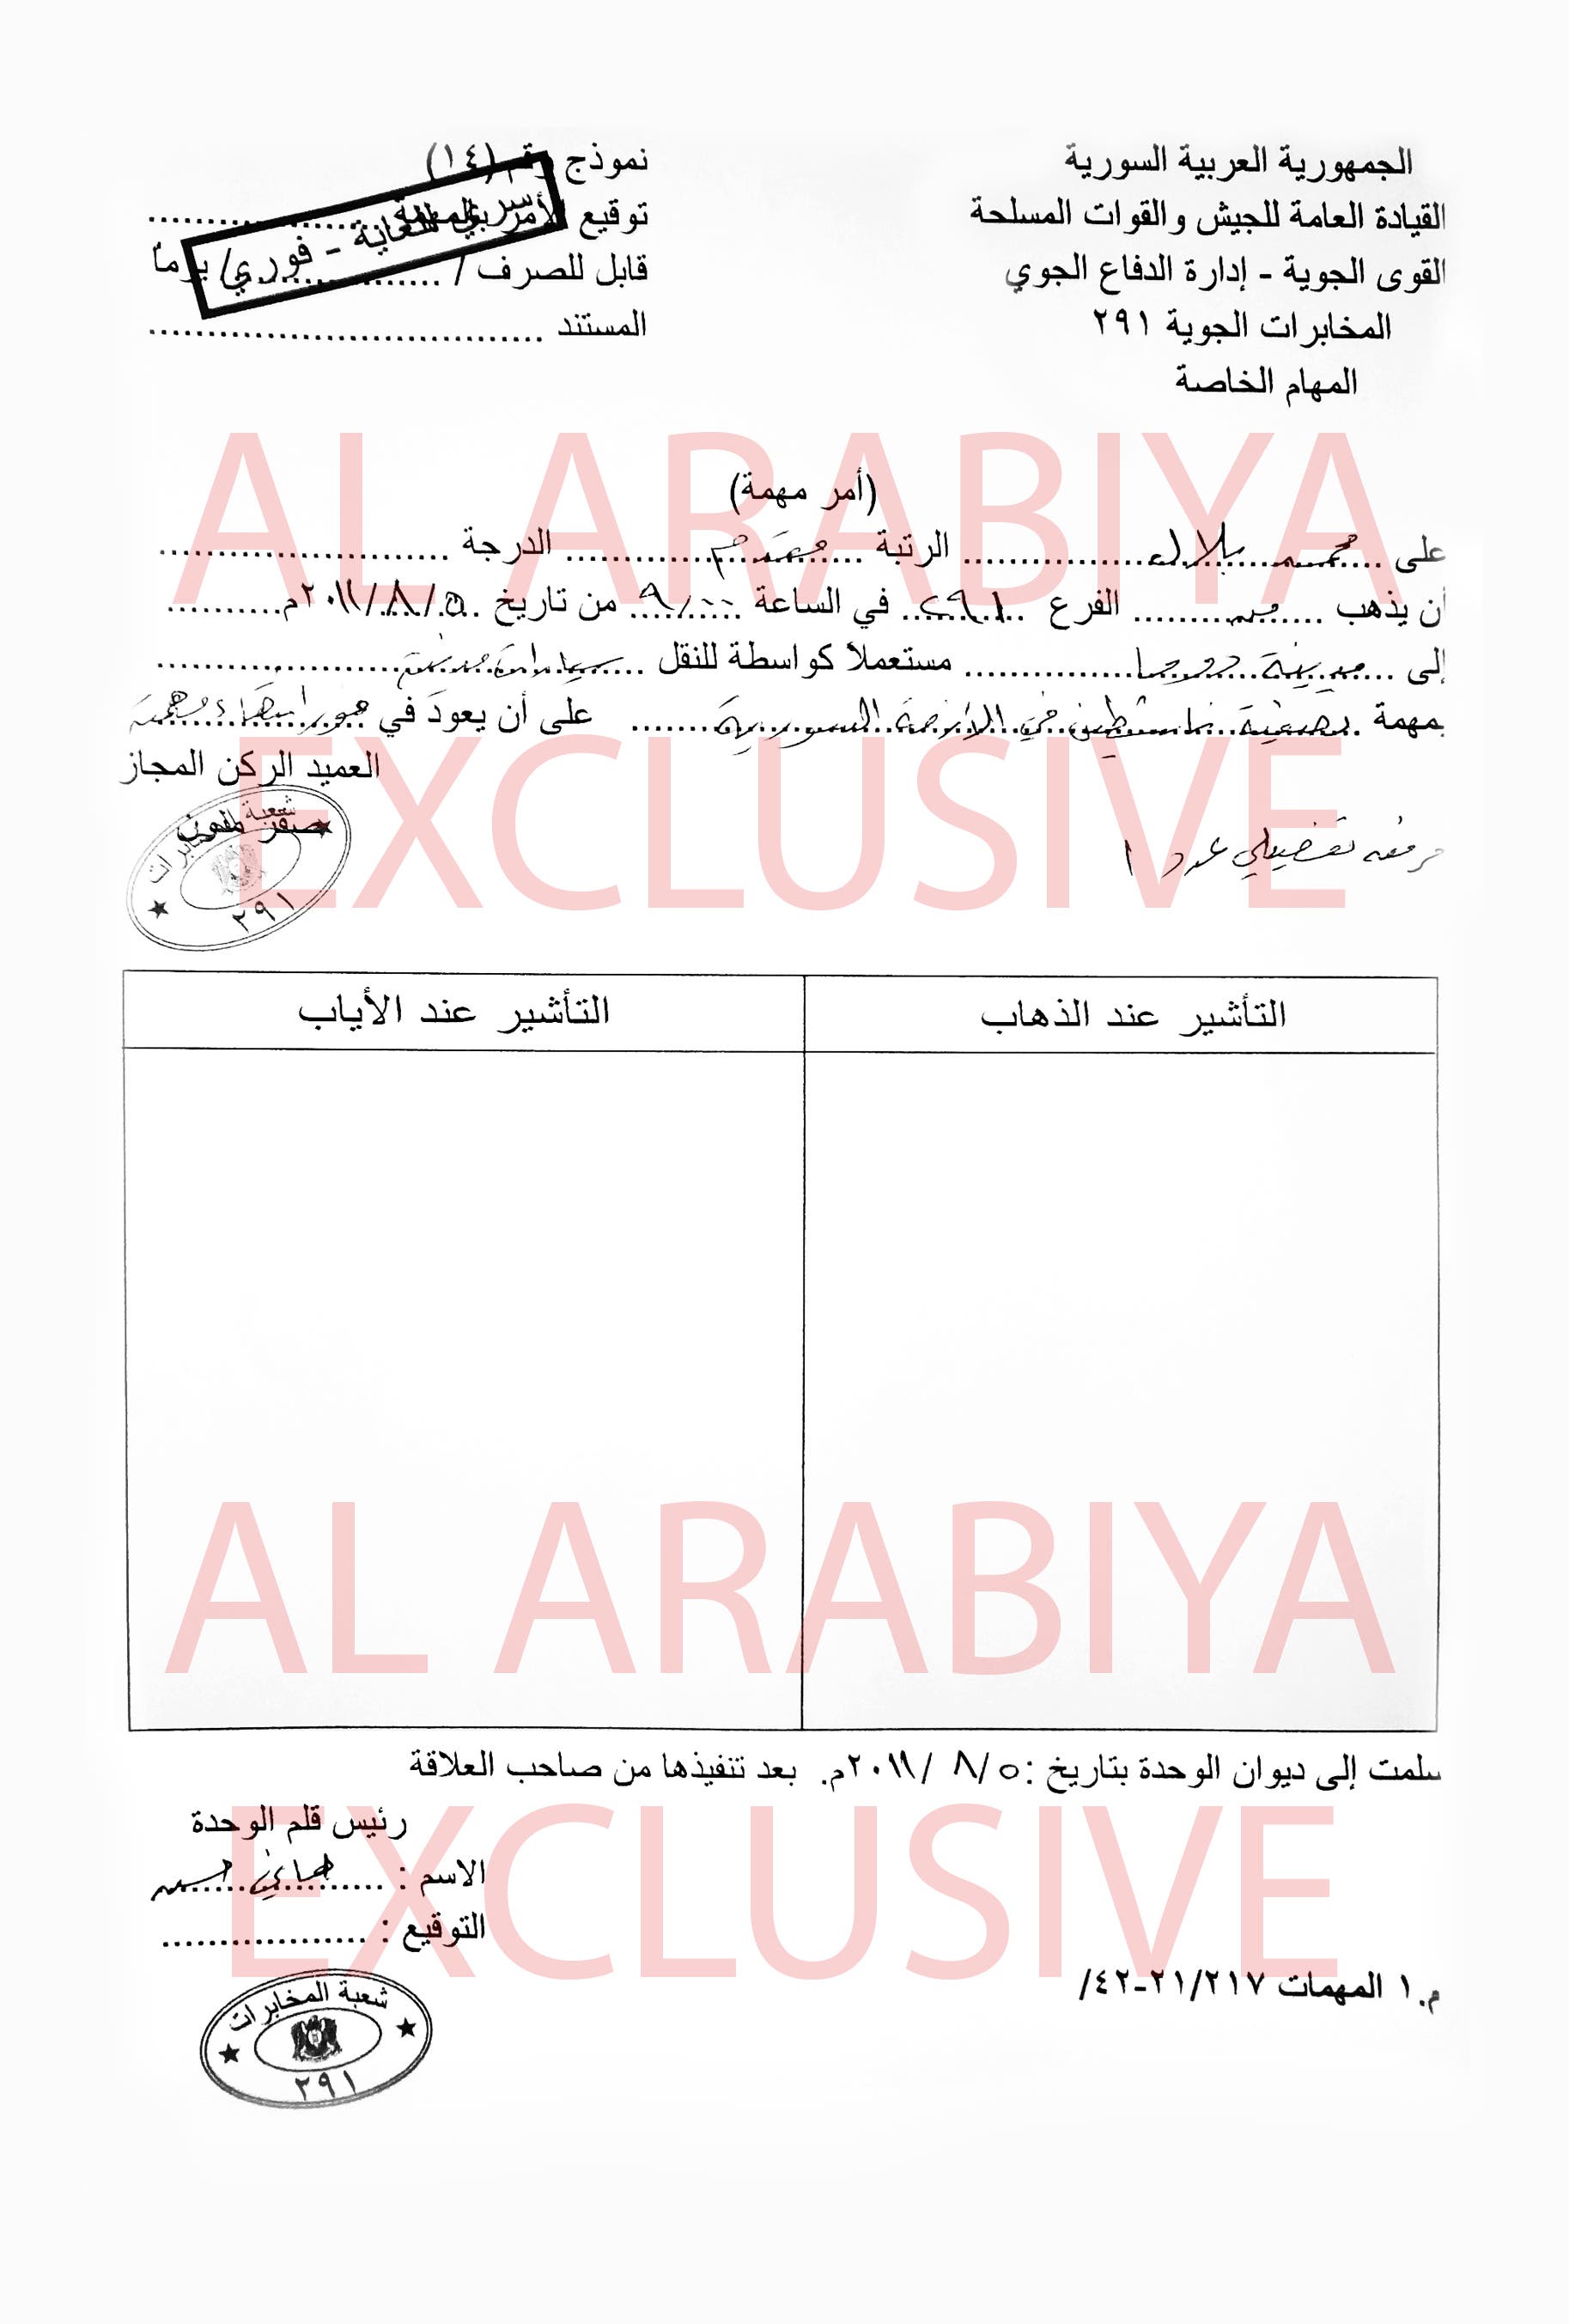 A ‘top secret’ file orders an agent to carry out assassinations against activists nationwide. (Al Arbiya)